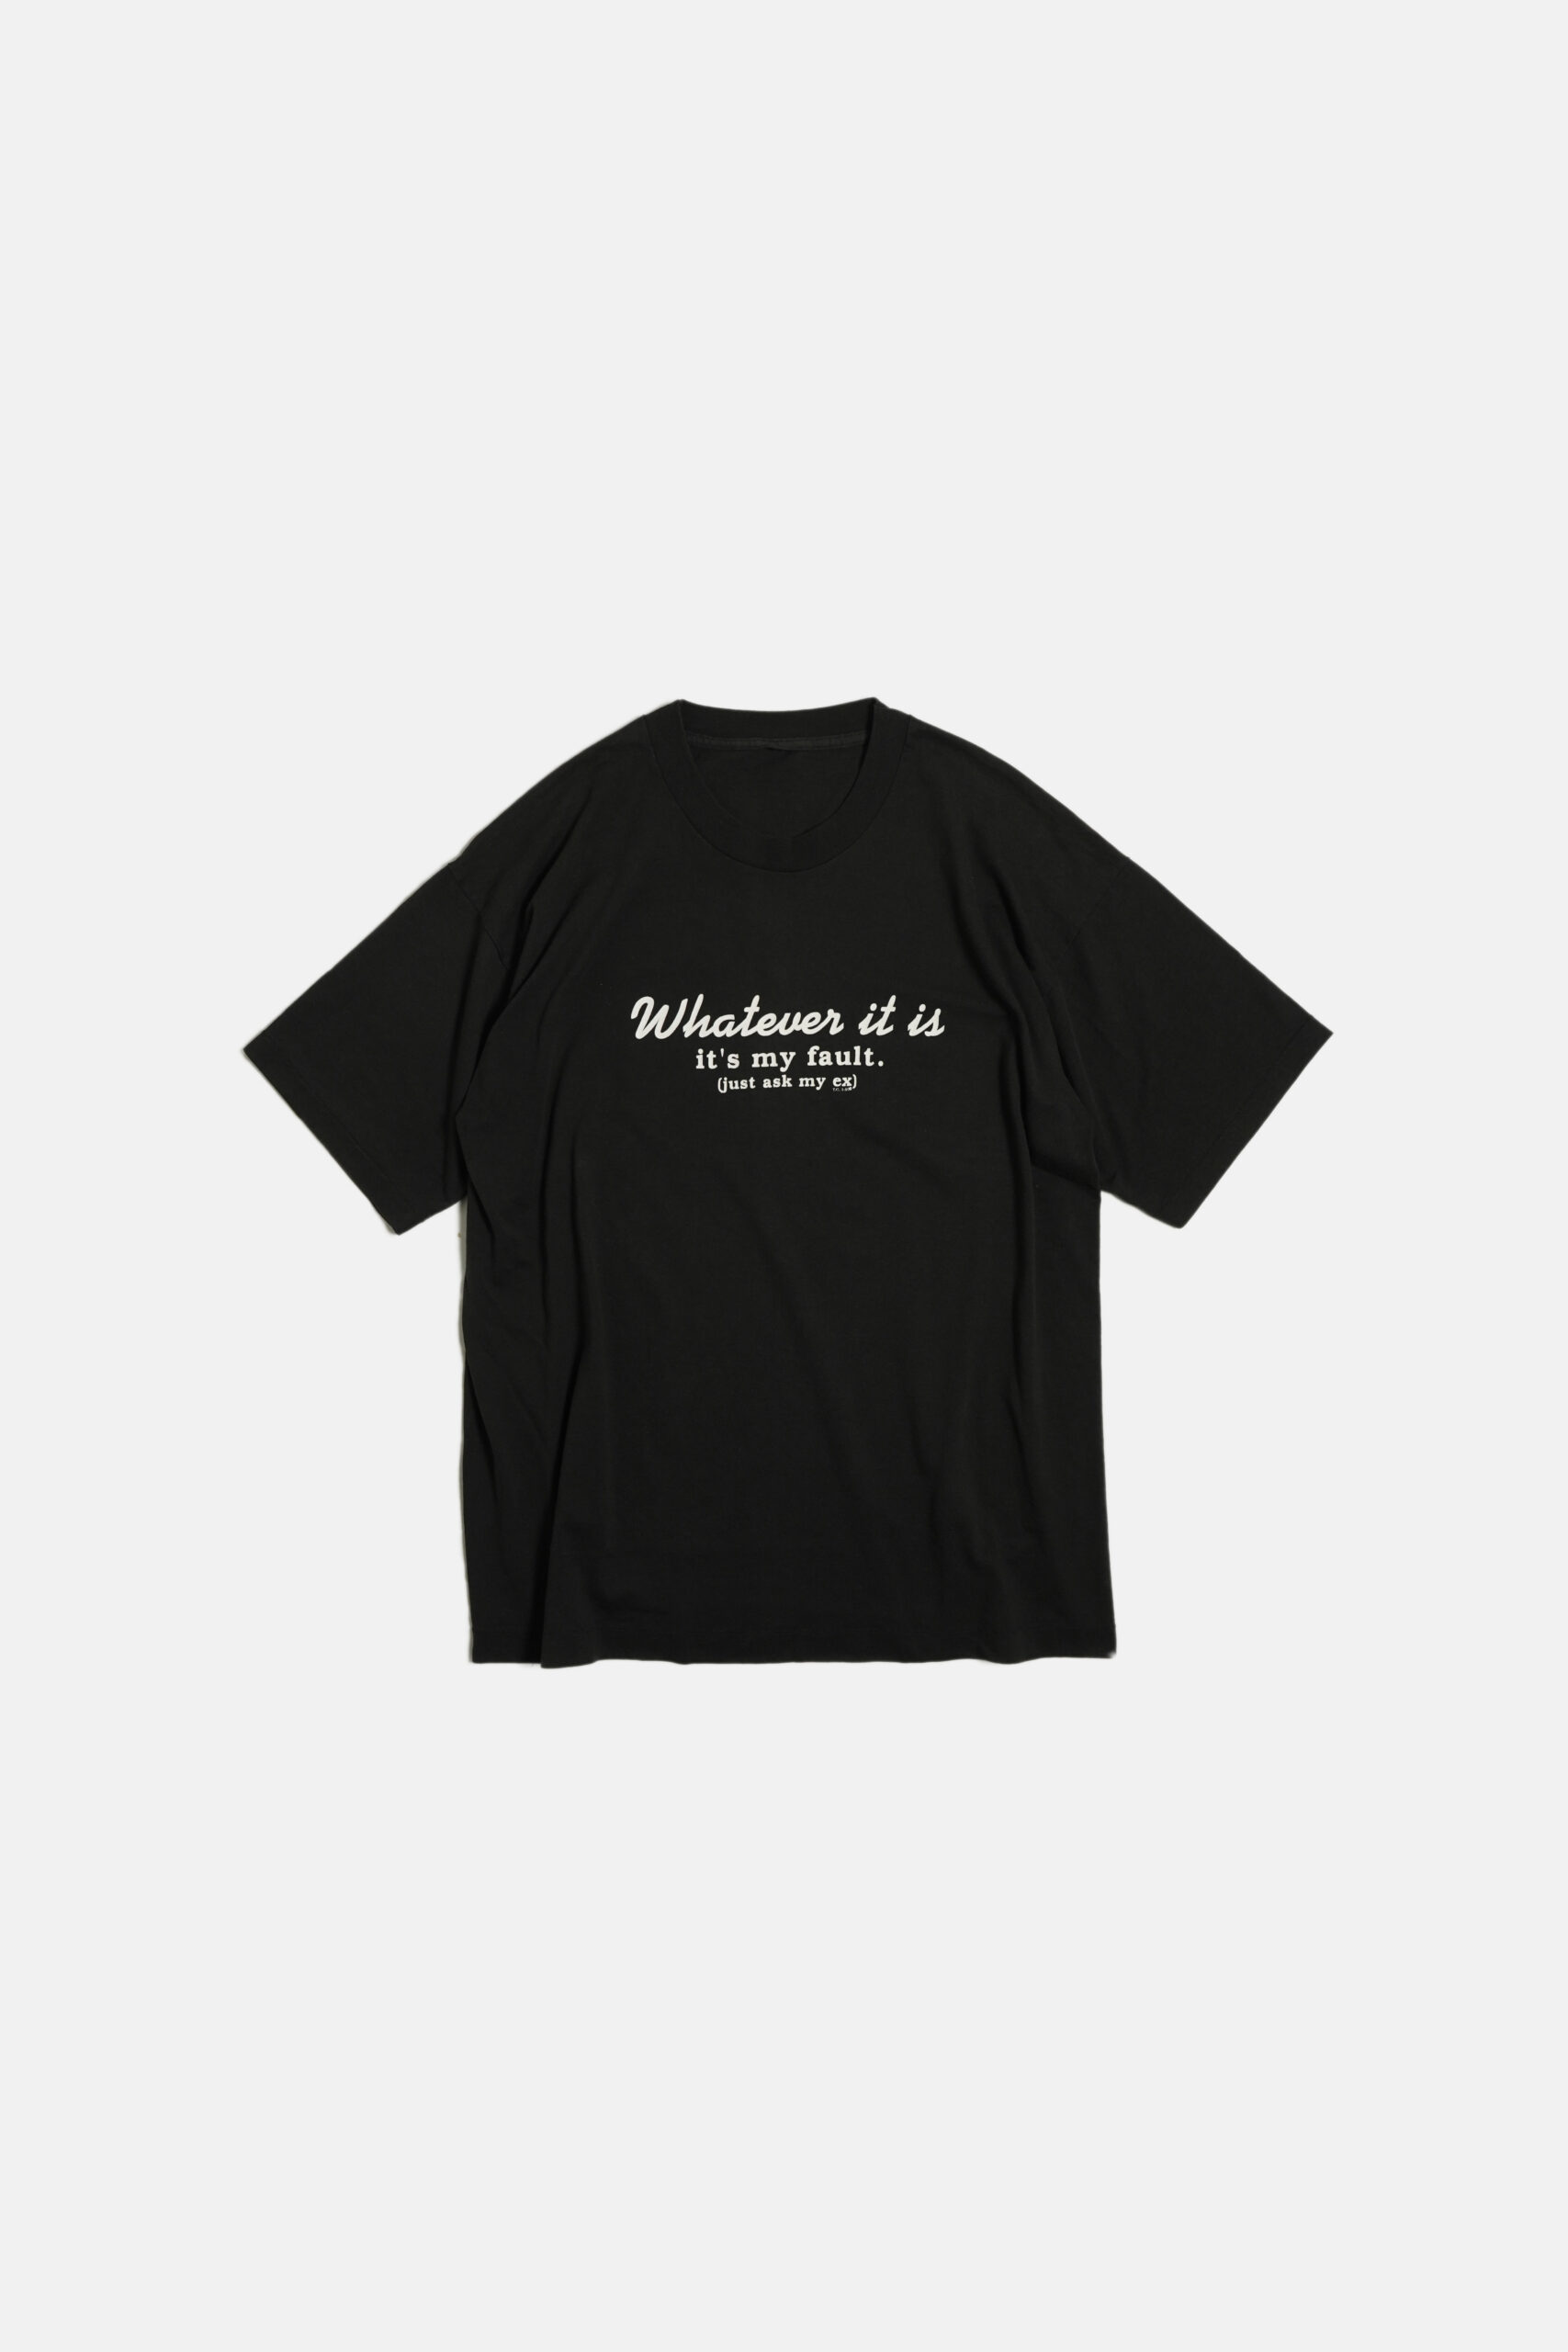 PRINTED S/S T-SHIRTS "WHATEVER IT IS"